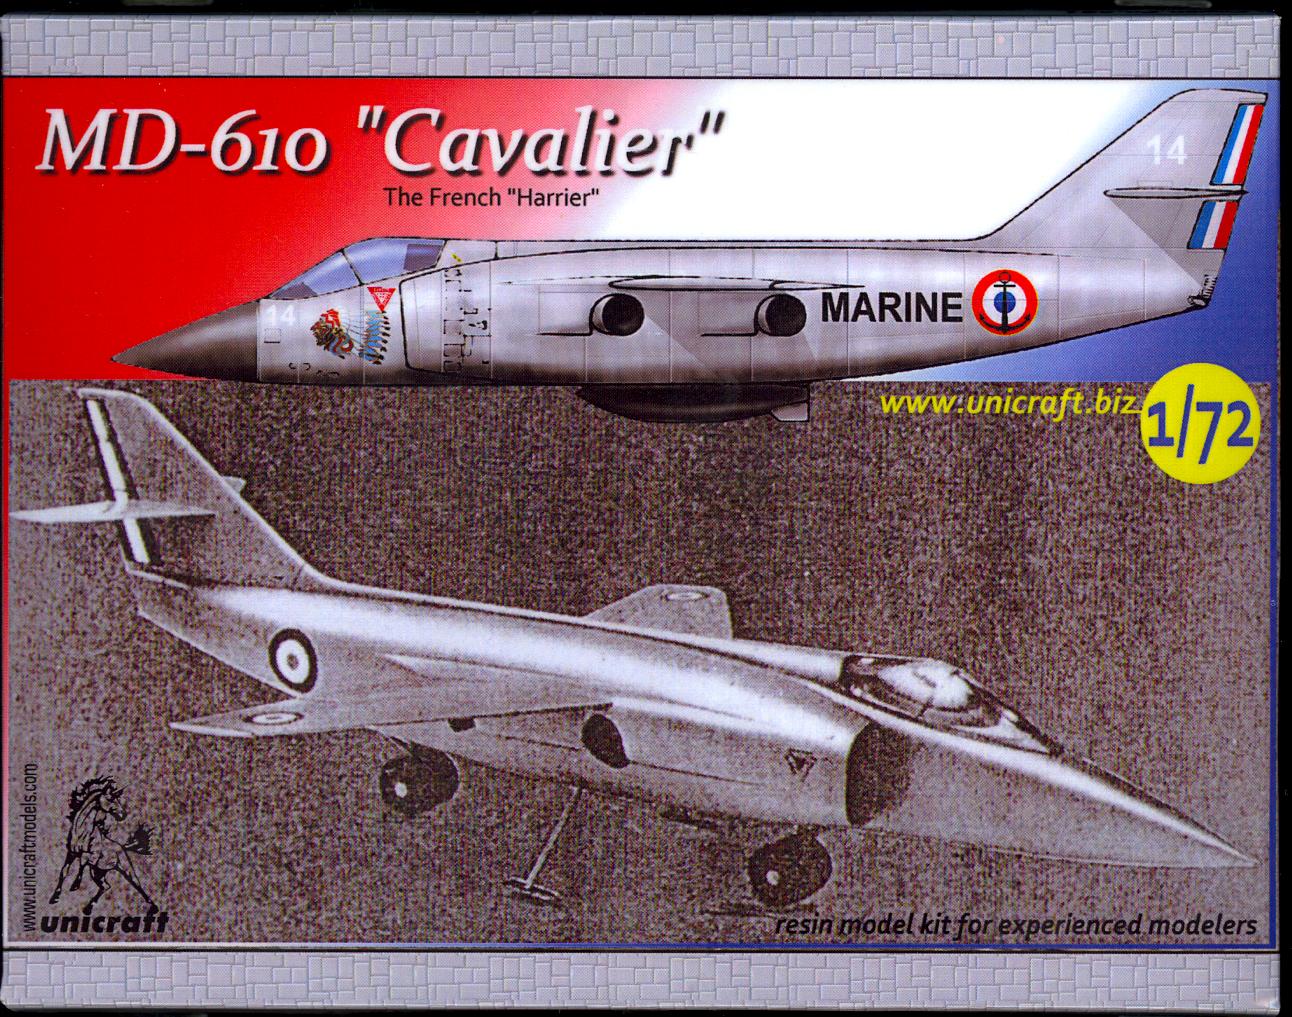 Sharkit Models 1//72 DASSAULT ACT 92C French Jet Project